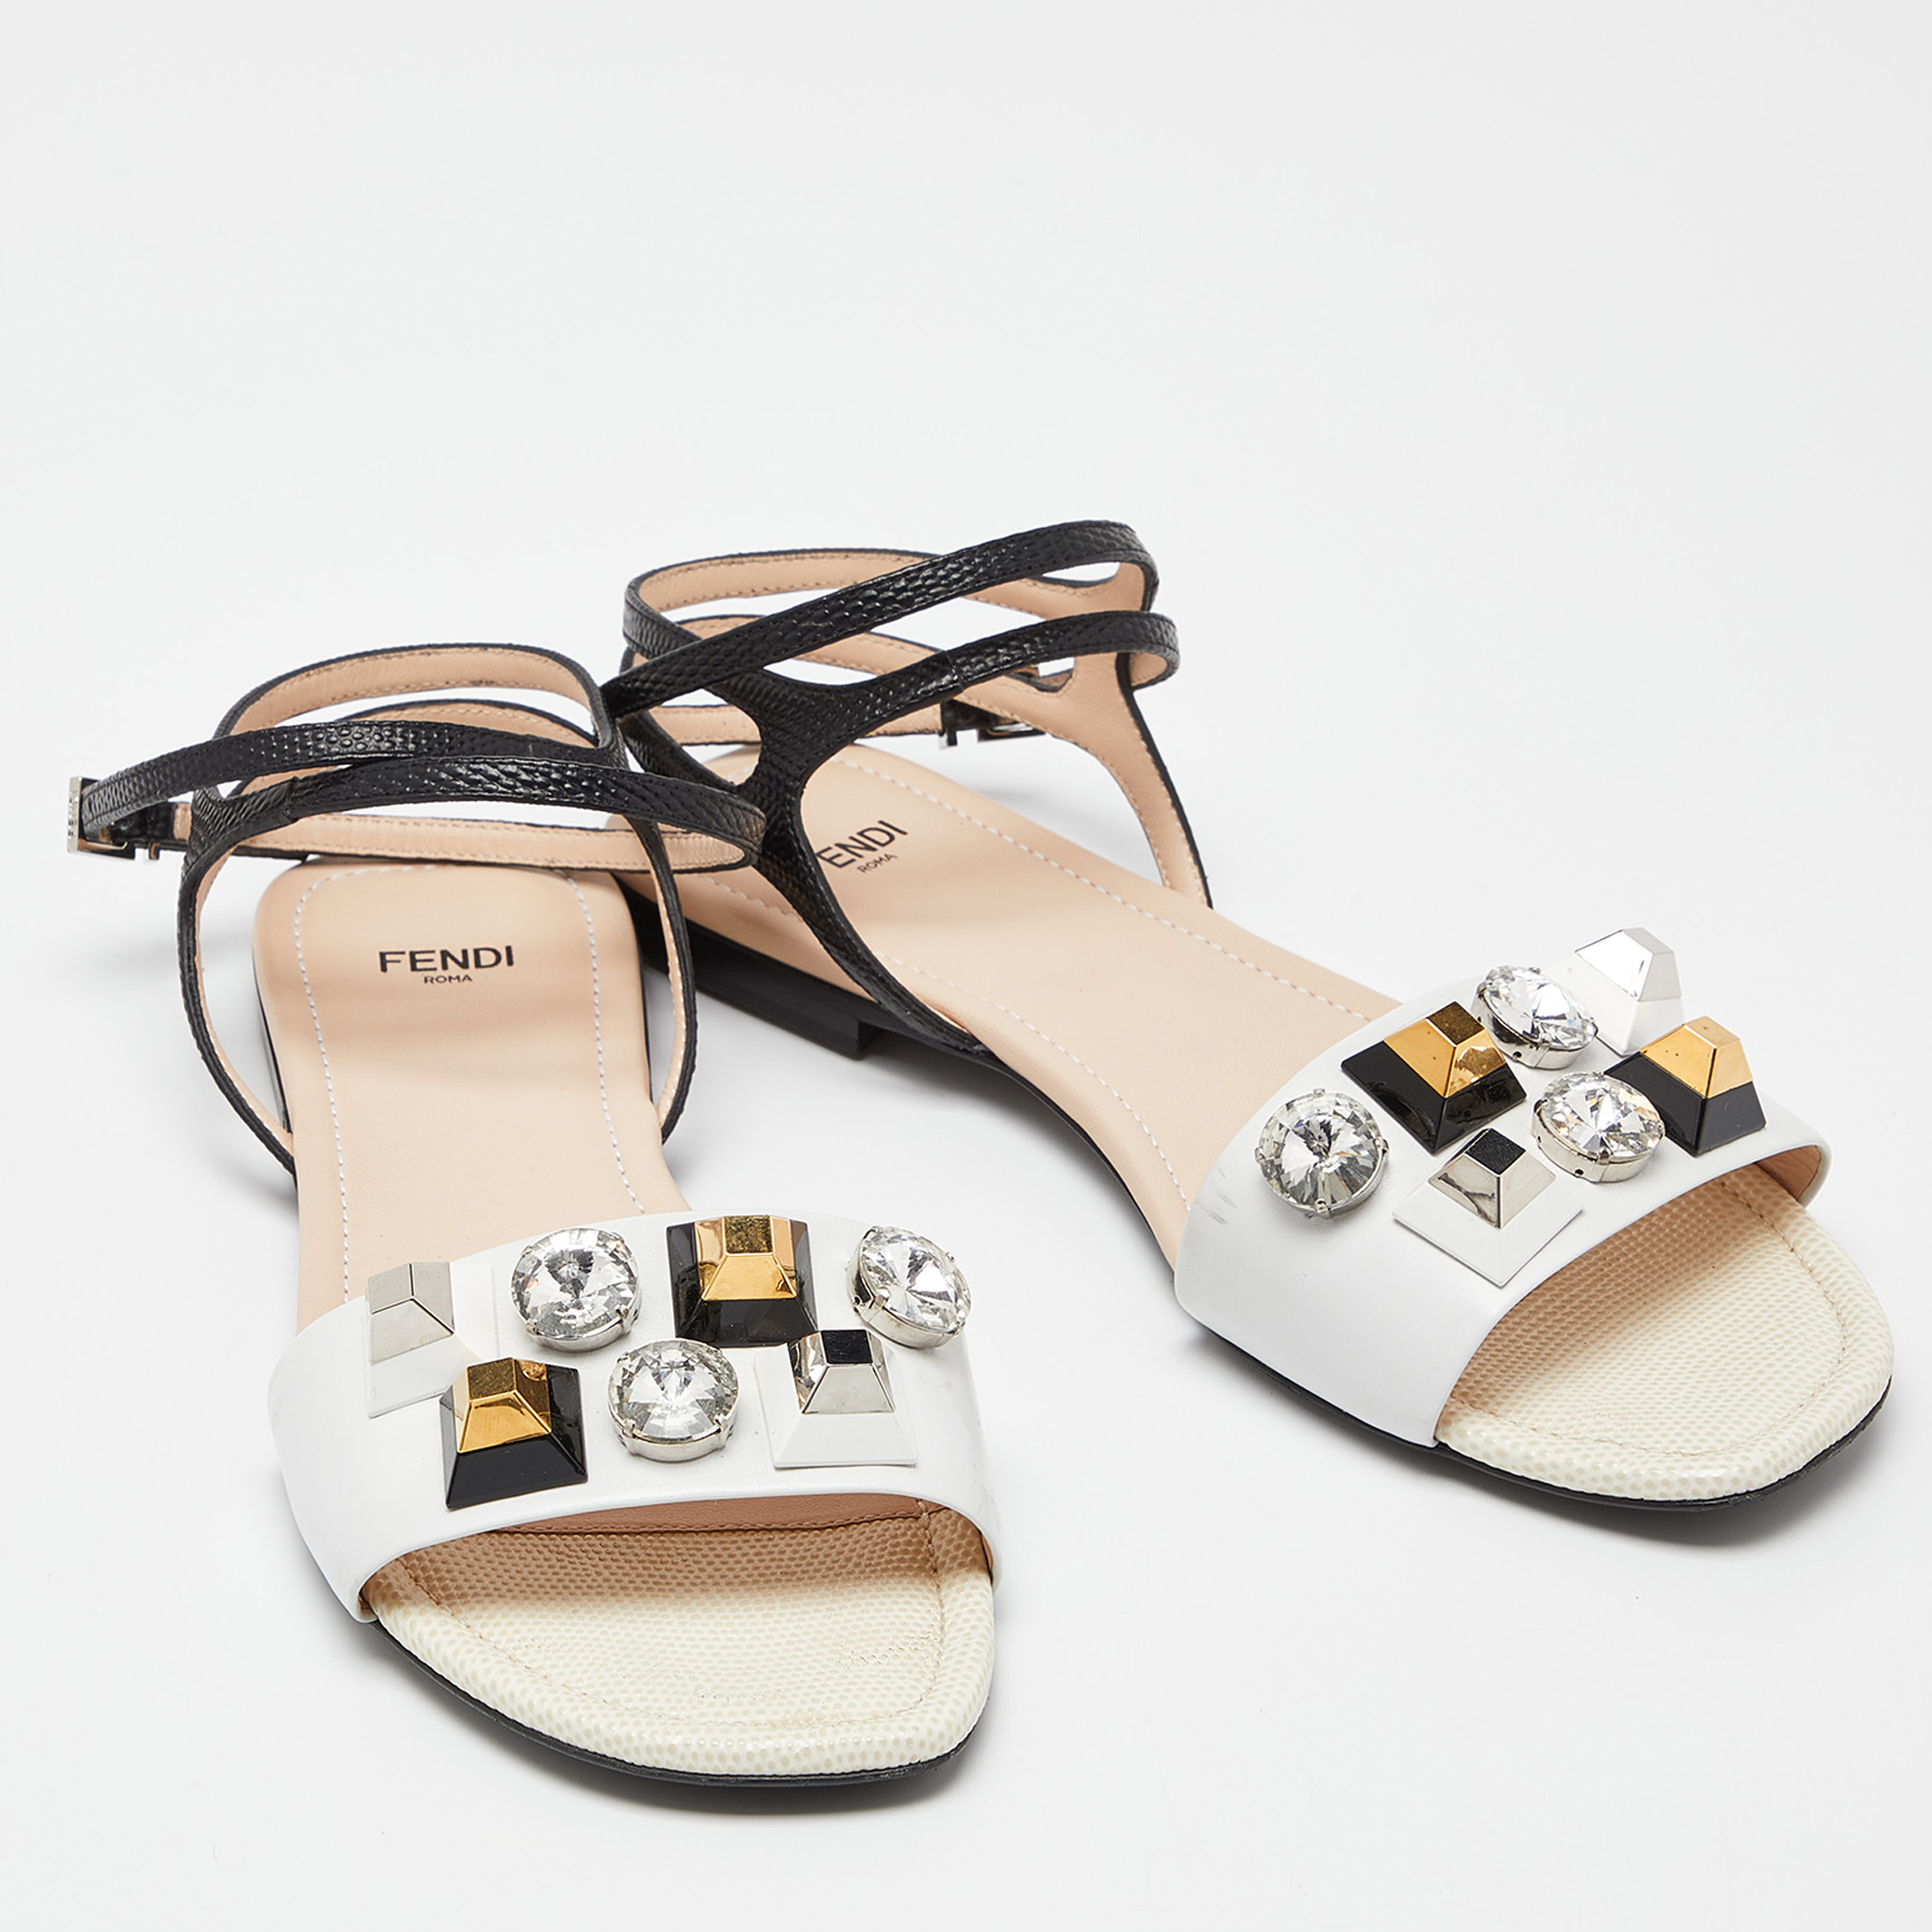 Fendi White/Black Lizard Embossed Leather Studded Ankle Strap Flat Sandals Size 40